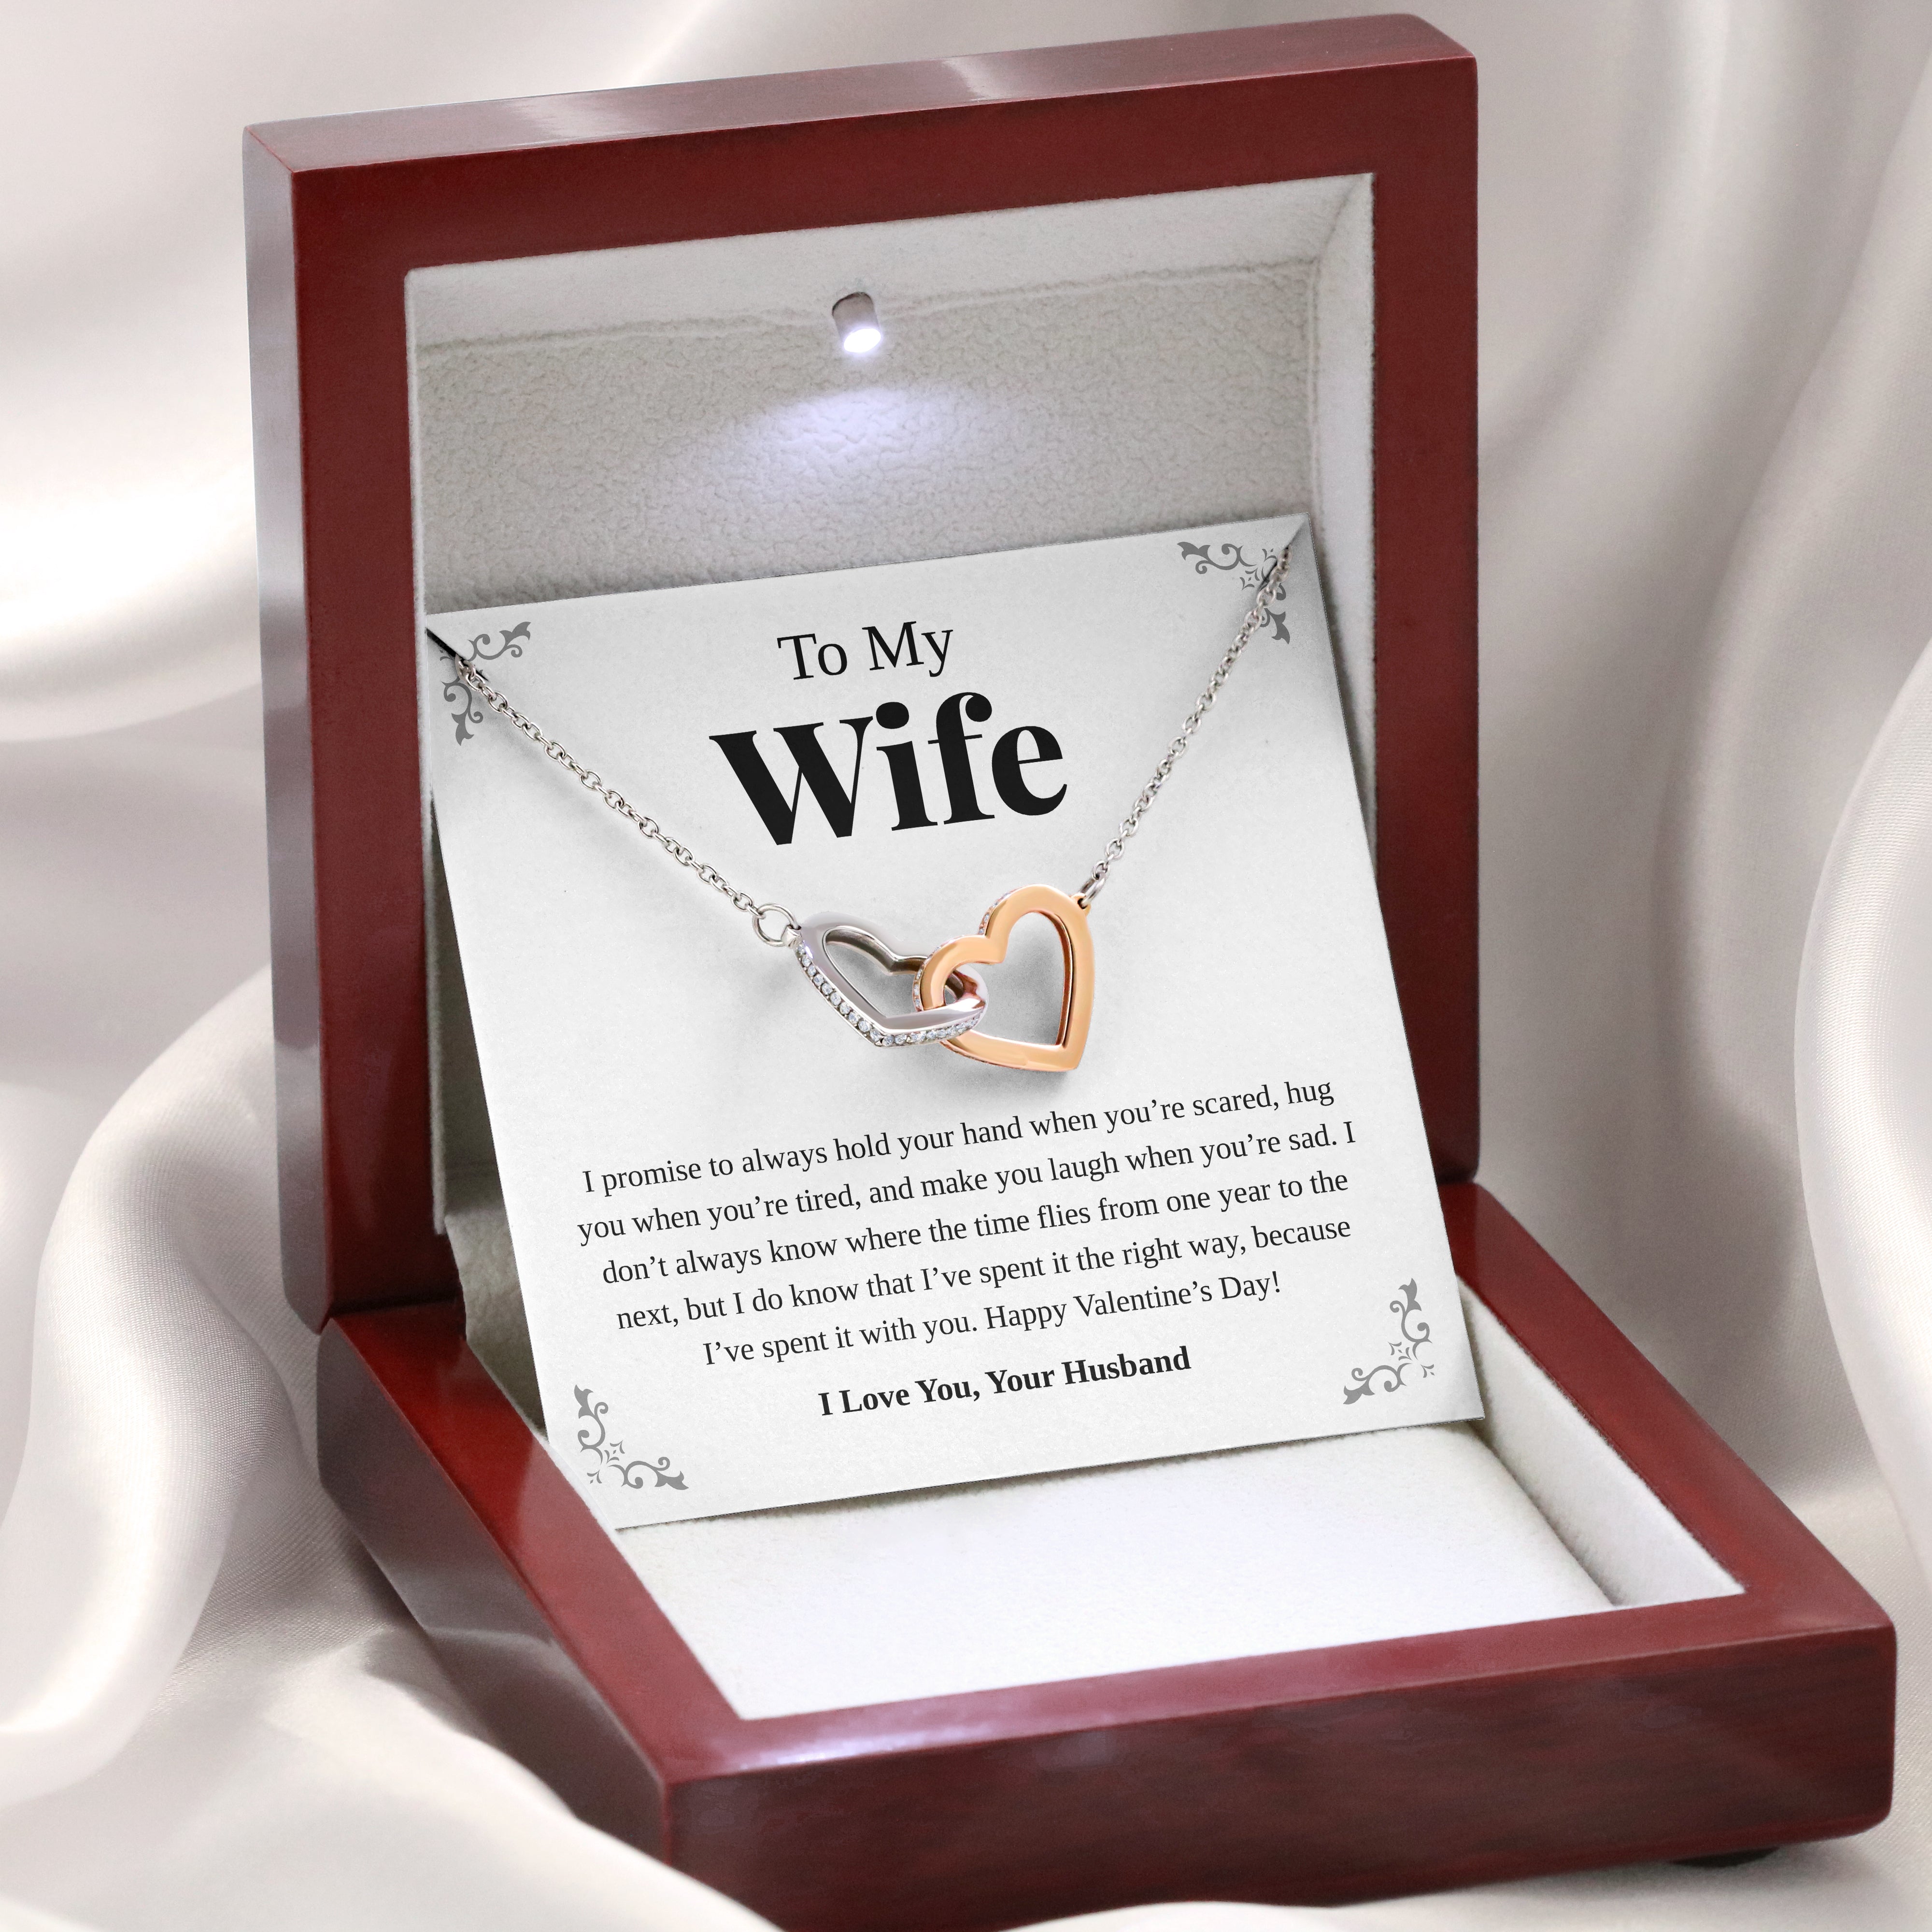 To My Wife | "The Right Way" | Interlocking Hearts Necklace